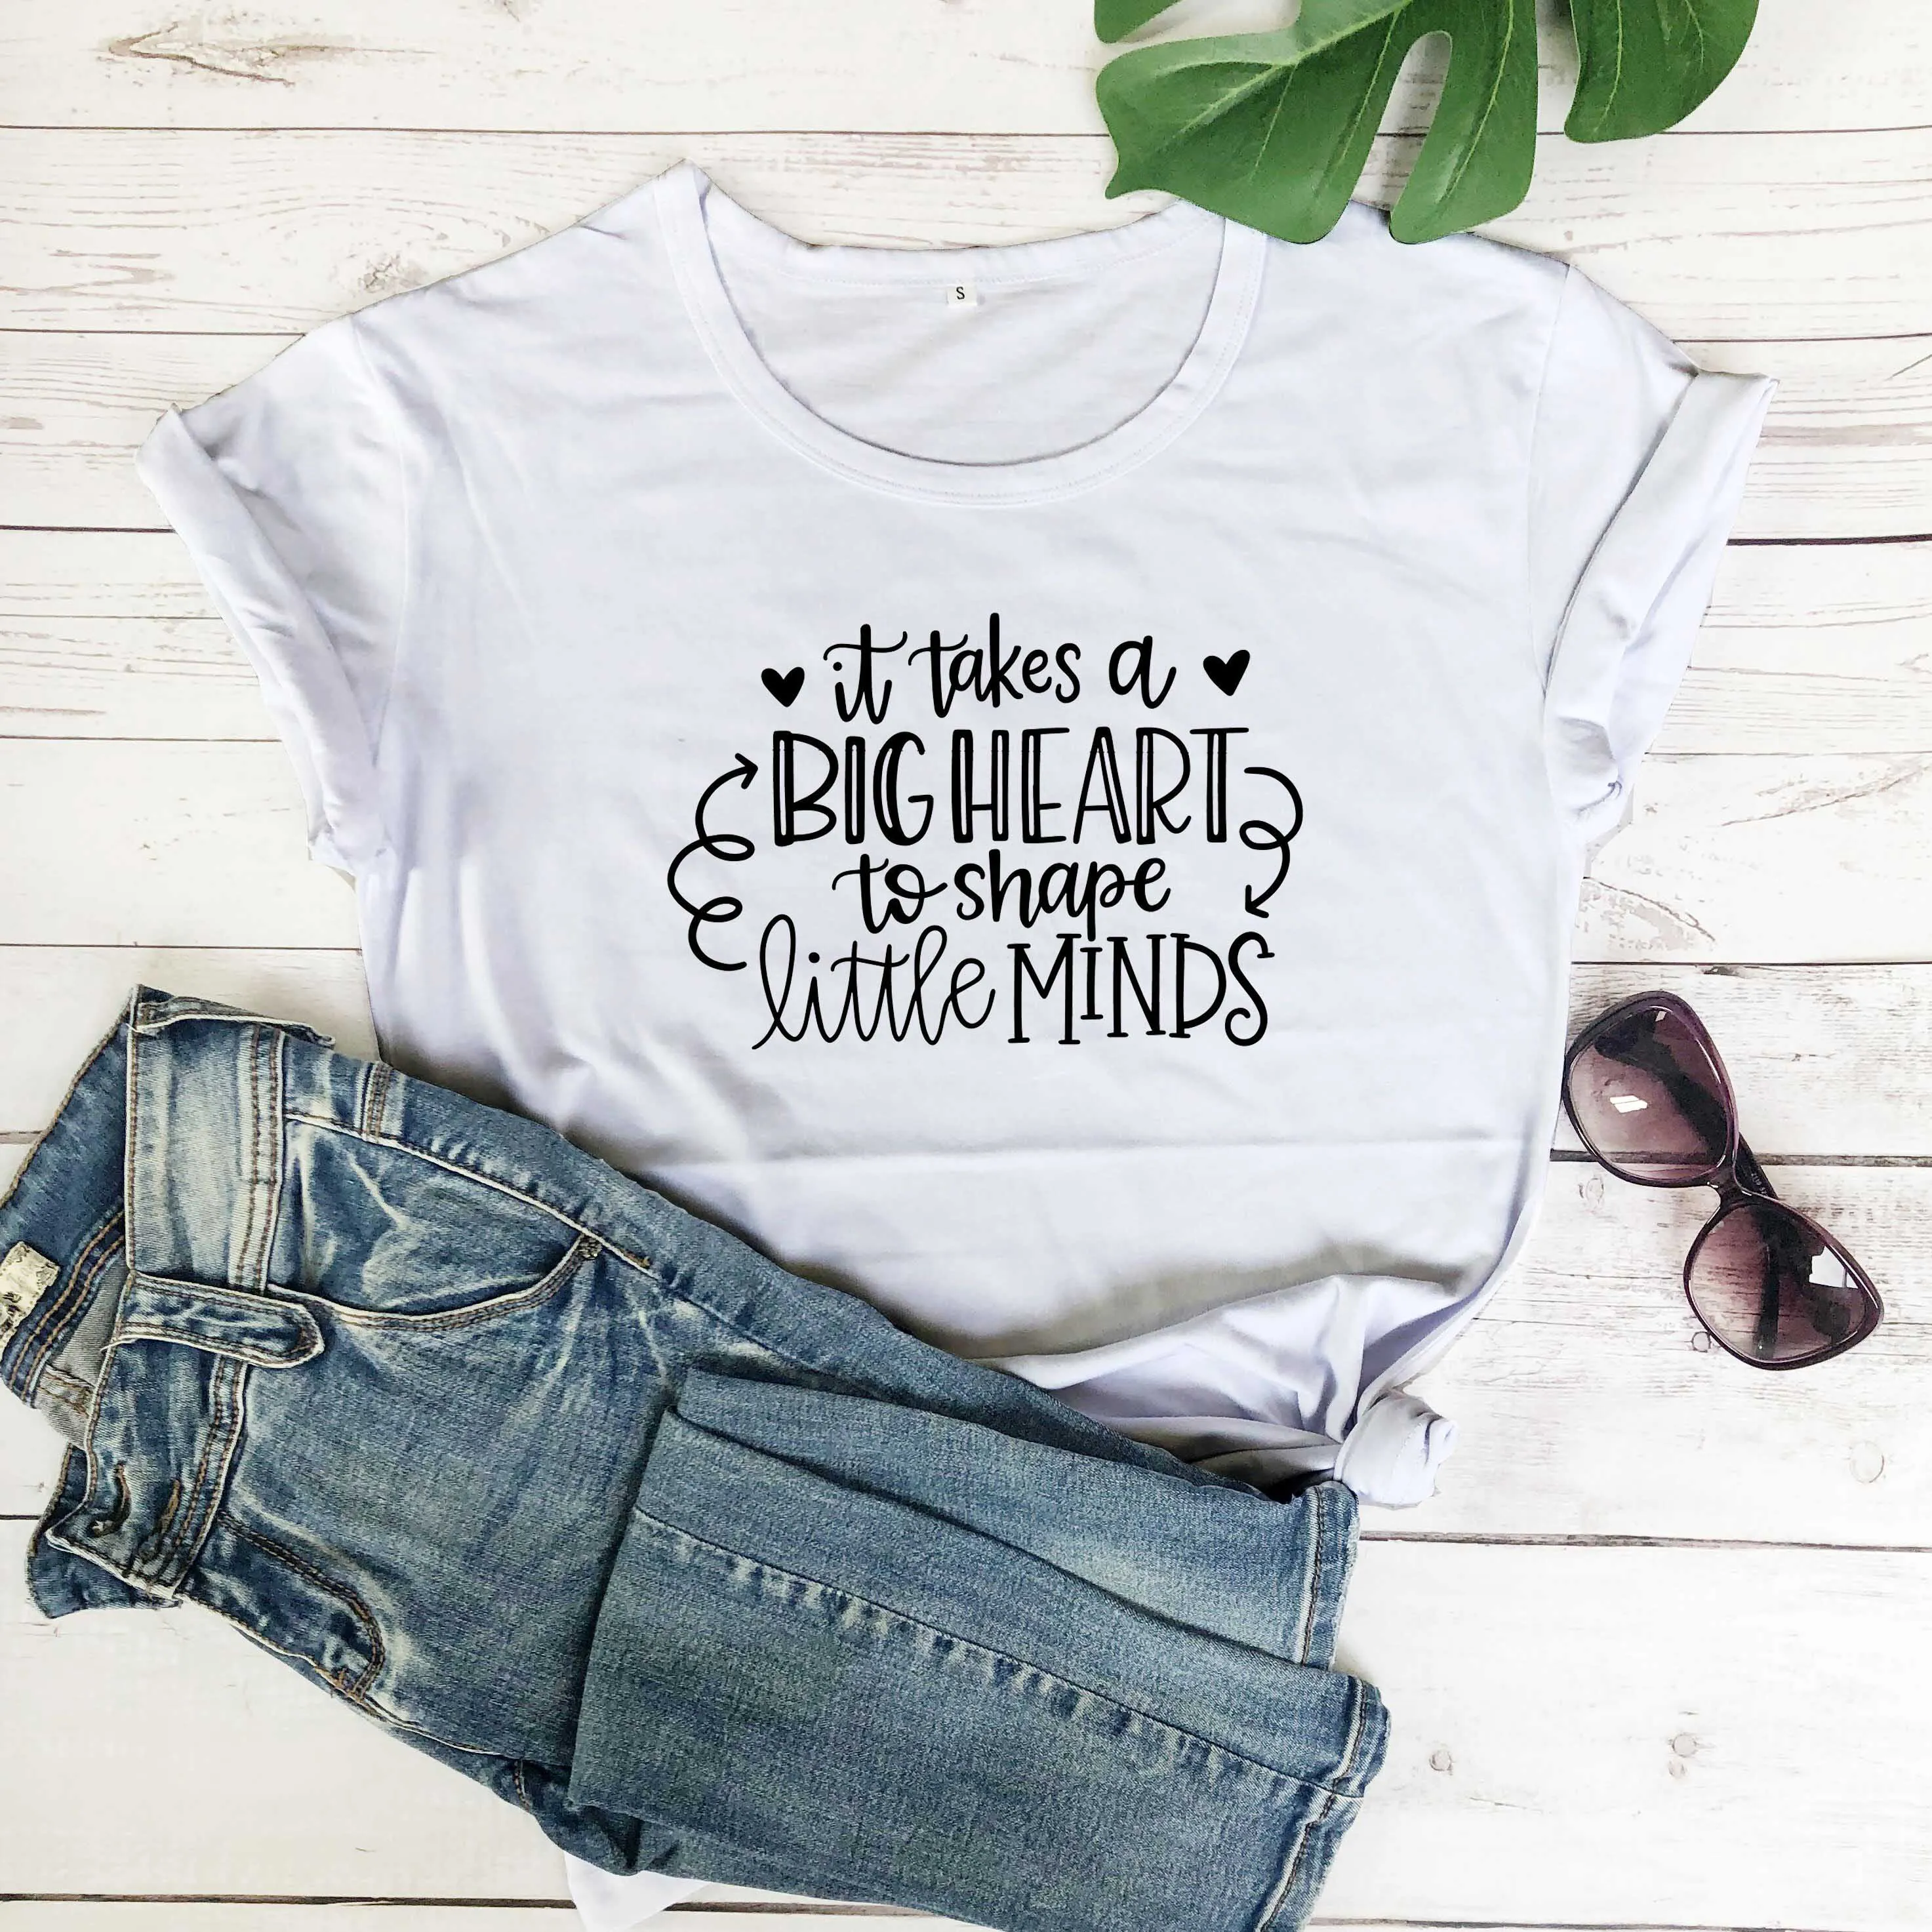 

It takes big heart to shape little mind slogan t shirt women fashion cotton casual hipster vintage street style tees tops P004